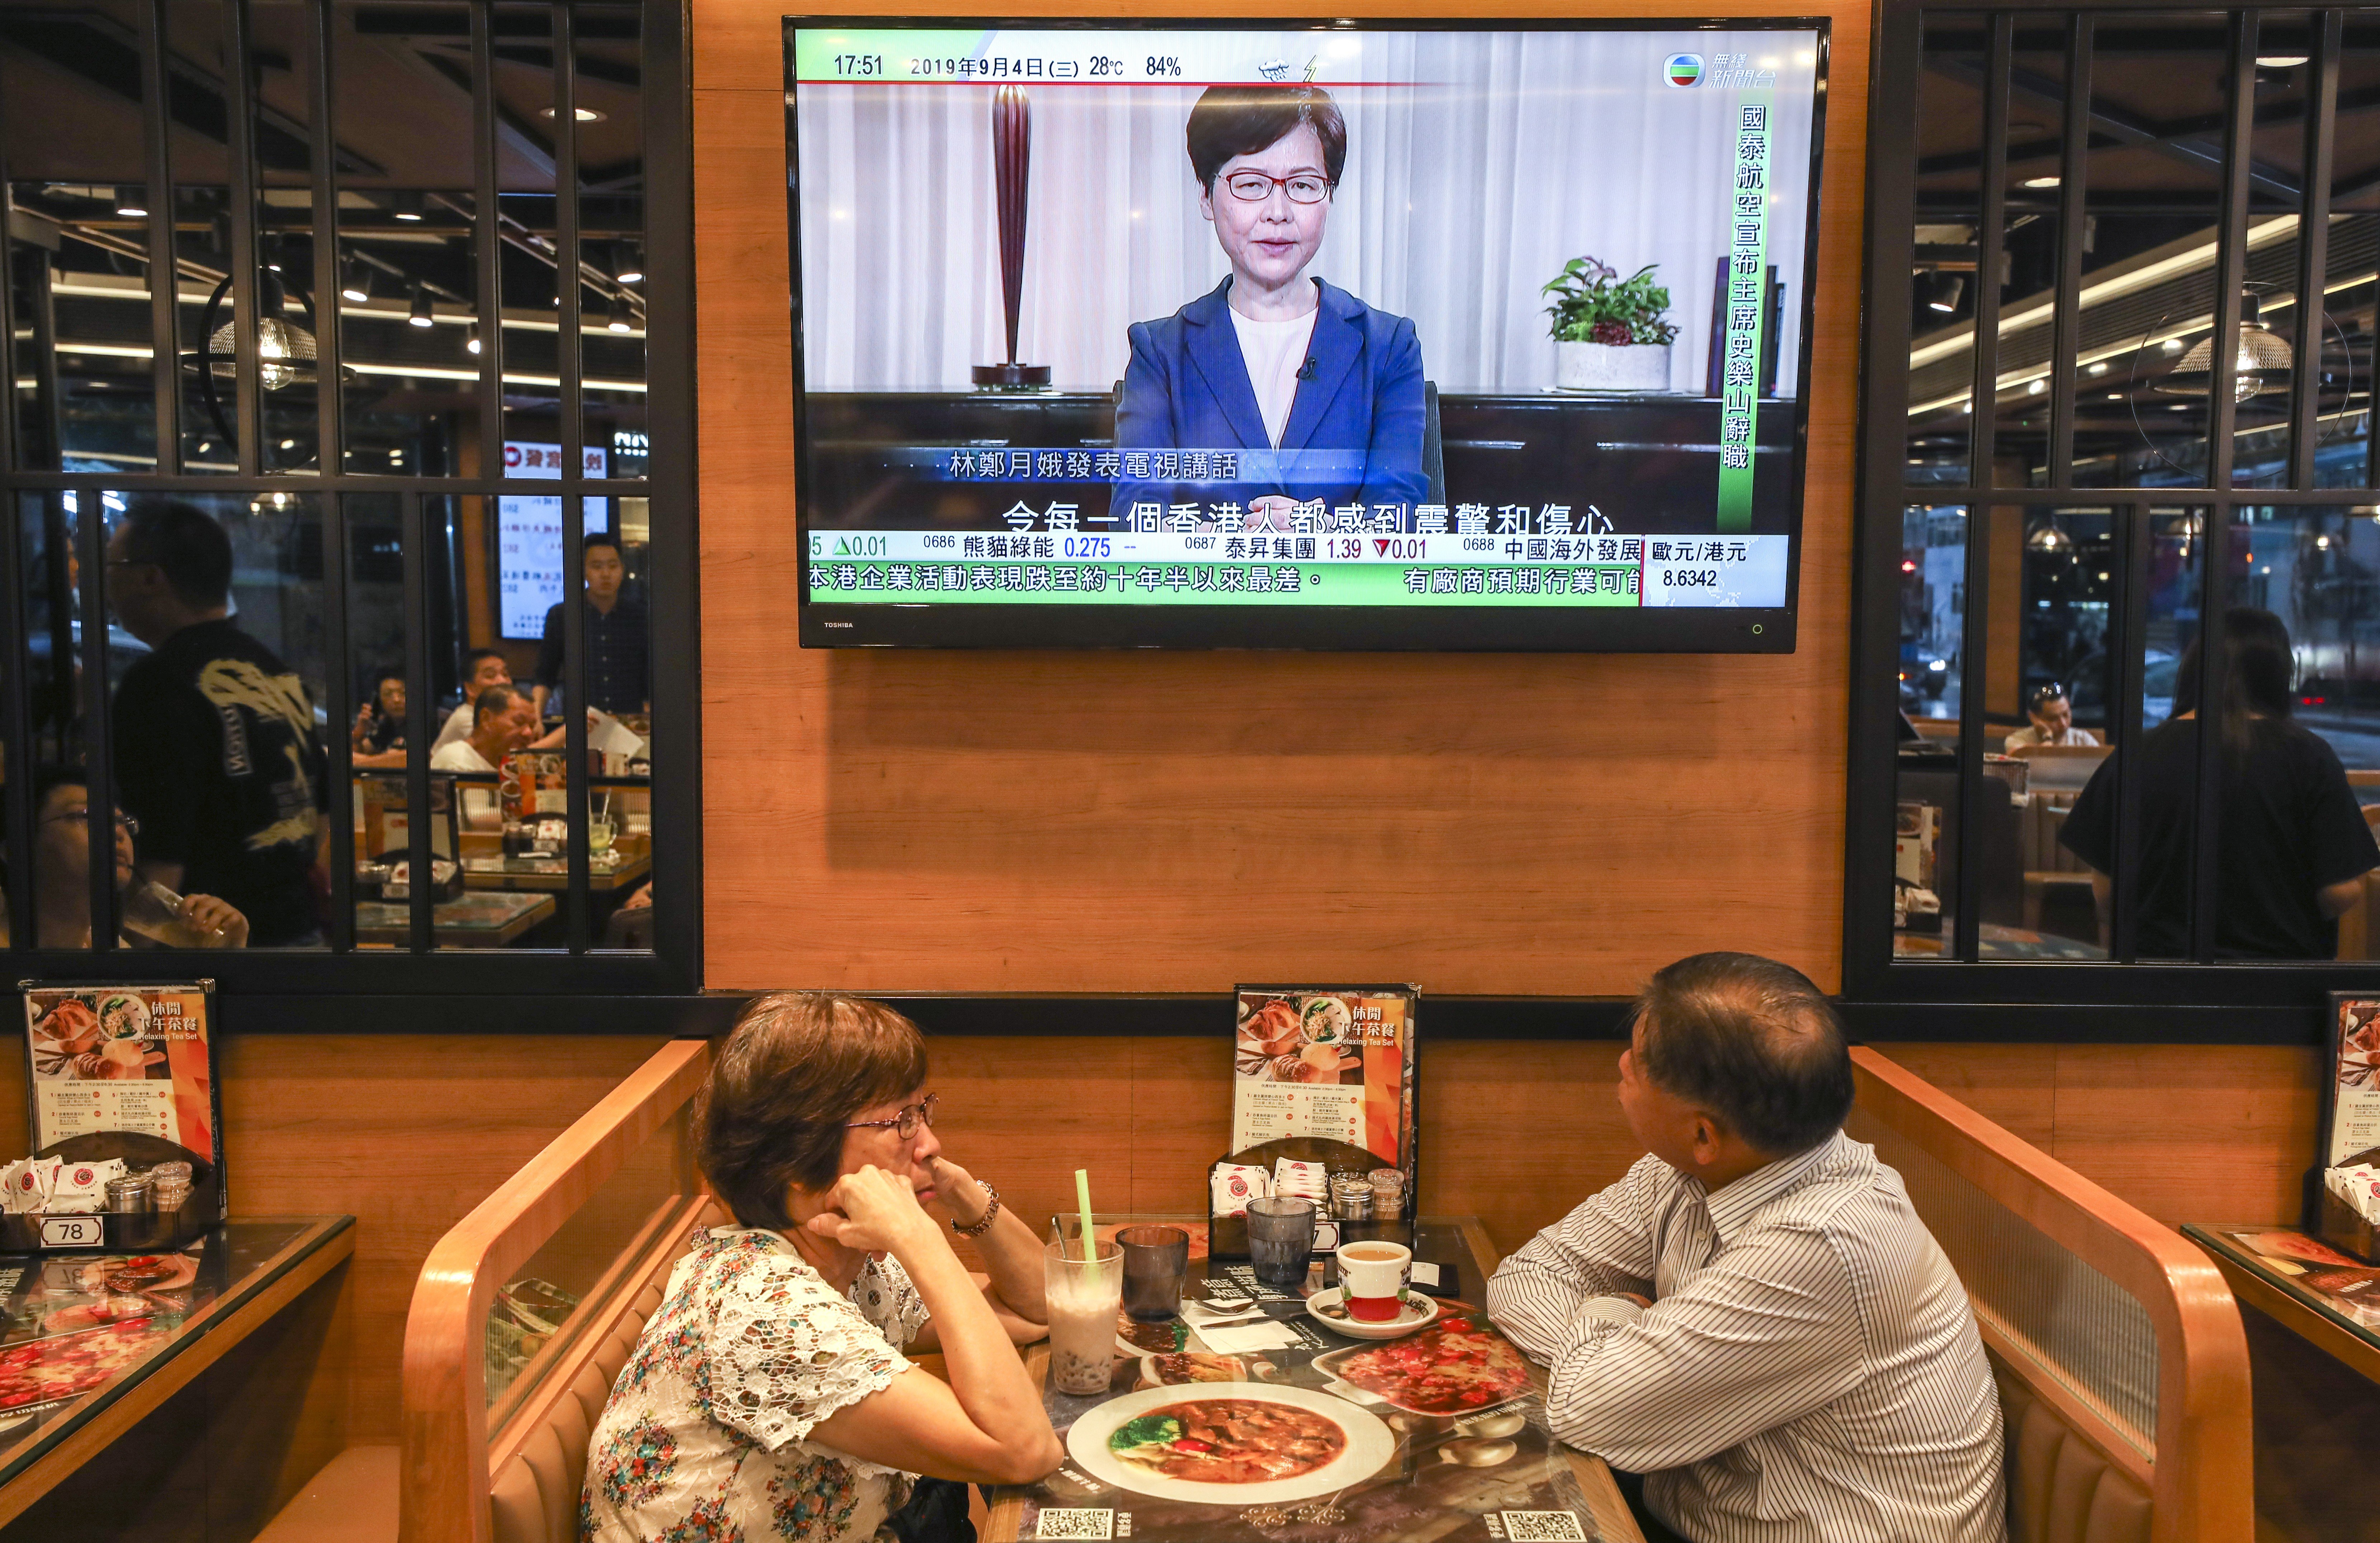 Diners listen as TV stations play a pre-recorded message from Chief Executive Carrie Lam announcing the withdrawal of the extradition bill, on September 4. Photo: Robert Ng